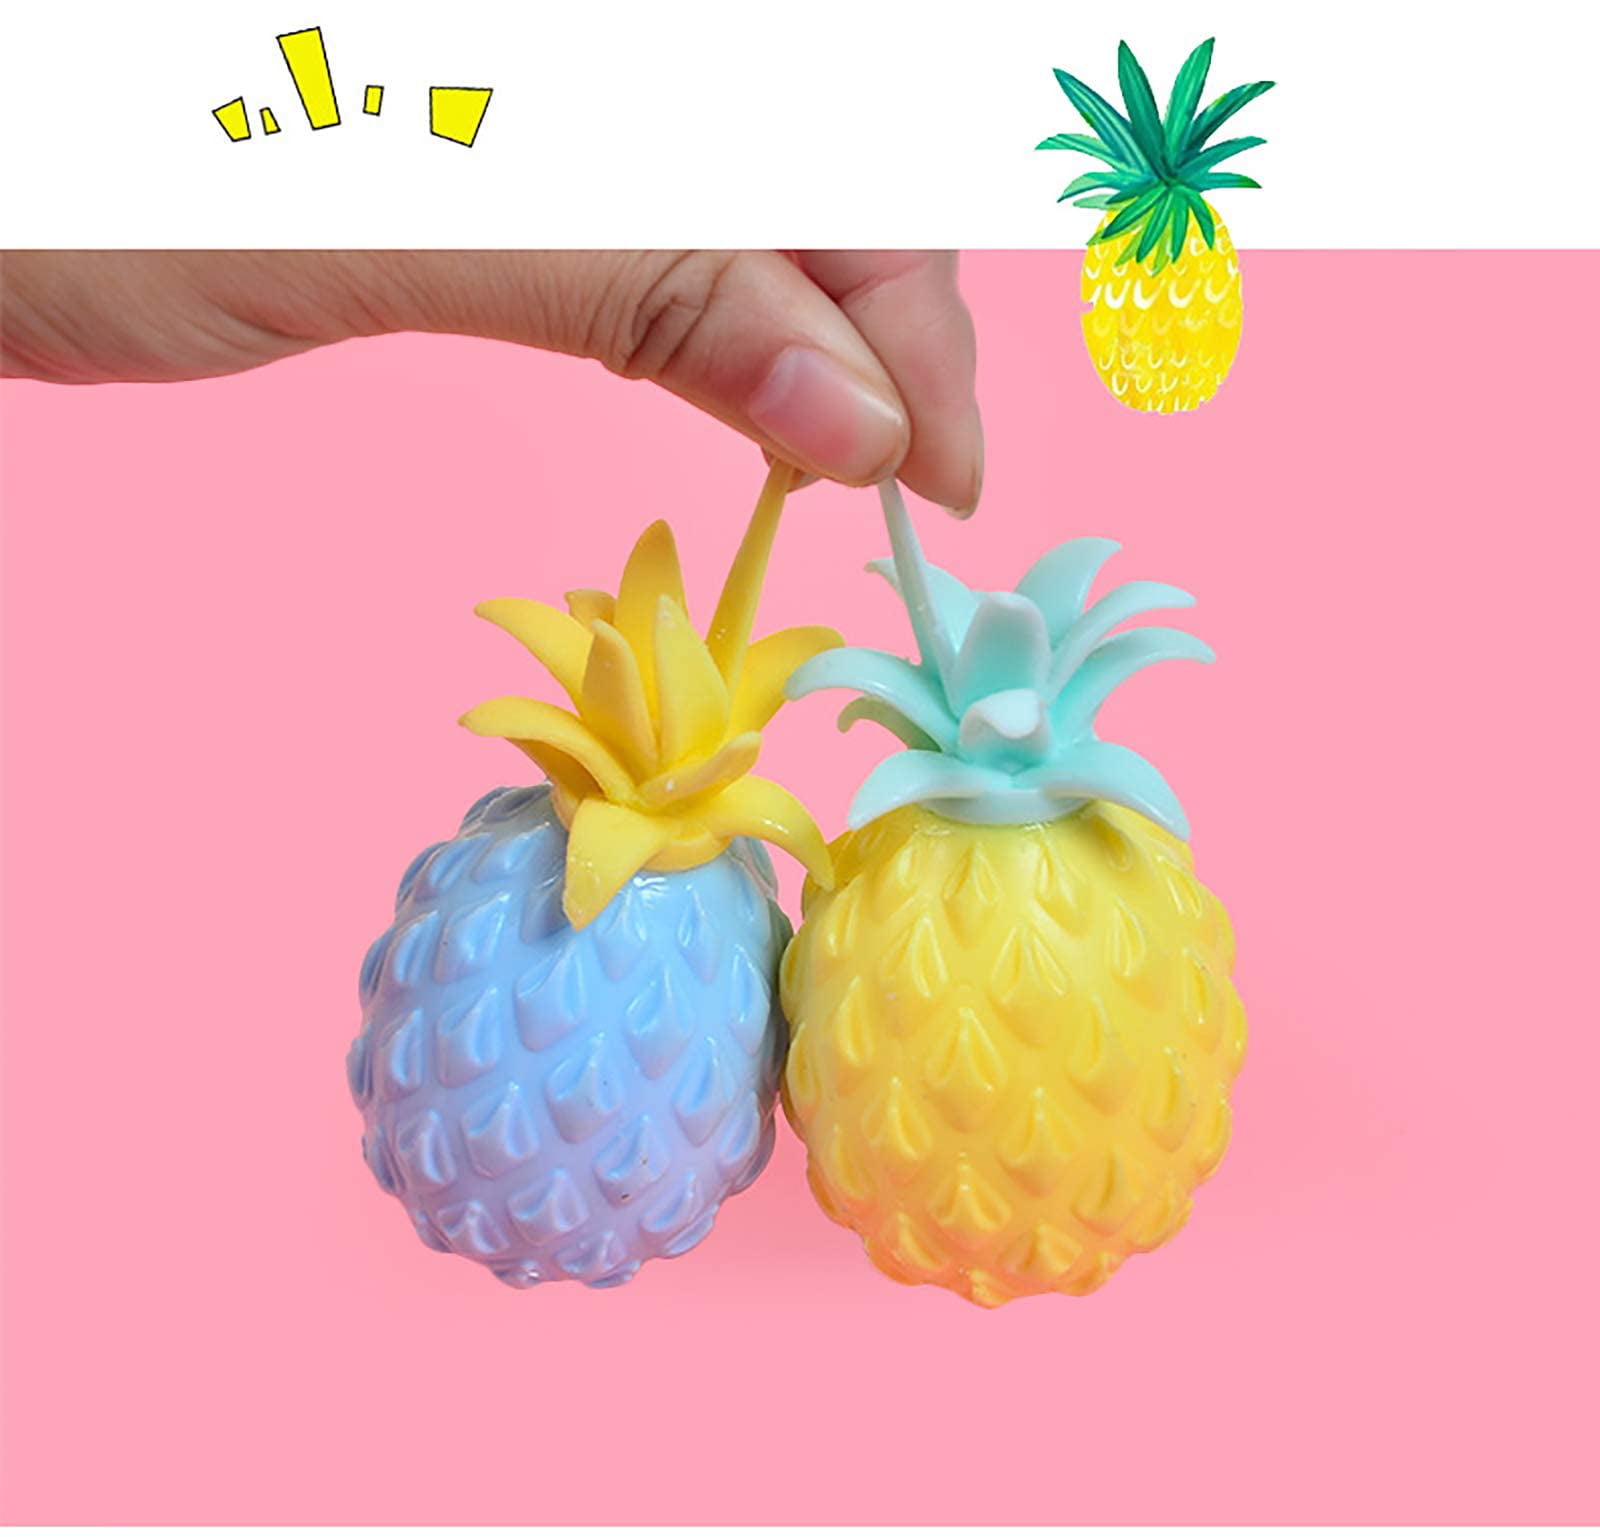 GMNP0di% Mini Squeeze Stress Relief Toys for Kids Adults Cute Pineapple Fruit Squishy Vent Toy Squeeze Grip Stress Reliever Home Decor Yellow Green